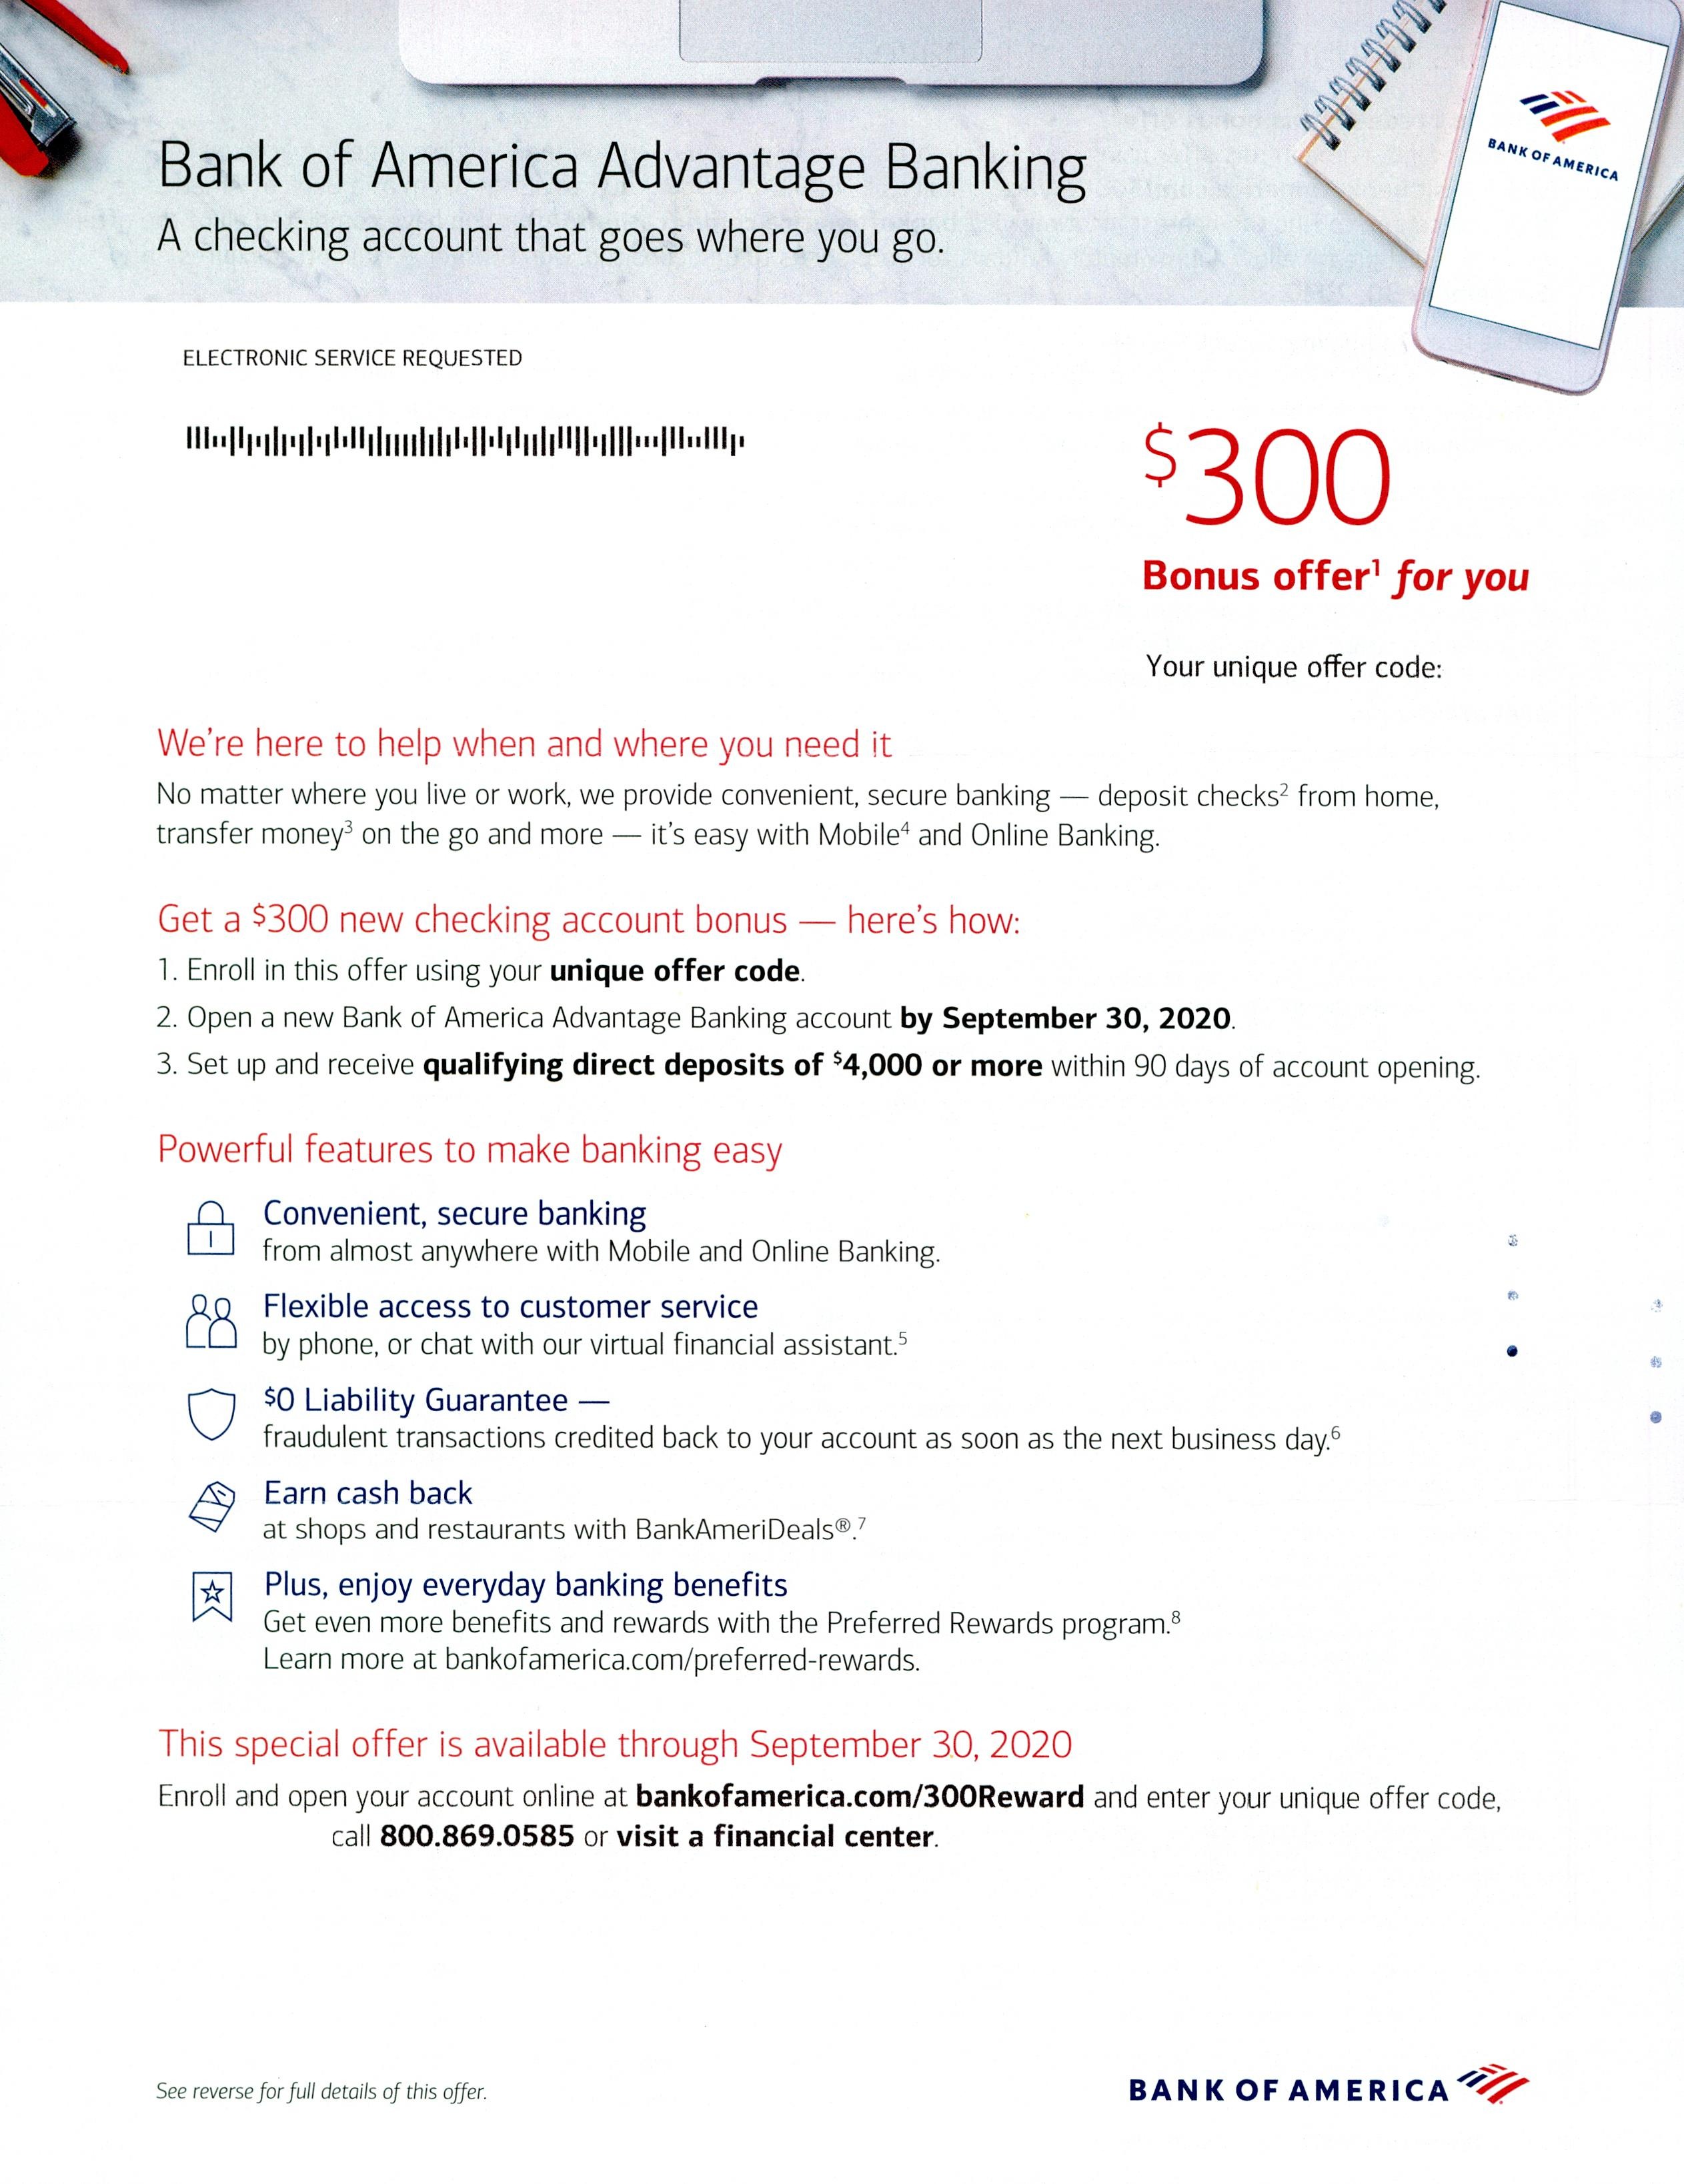 Bank of America direct mail 2020